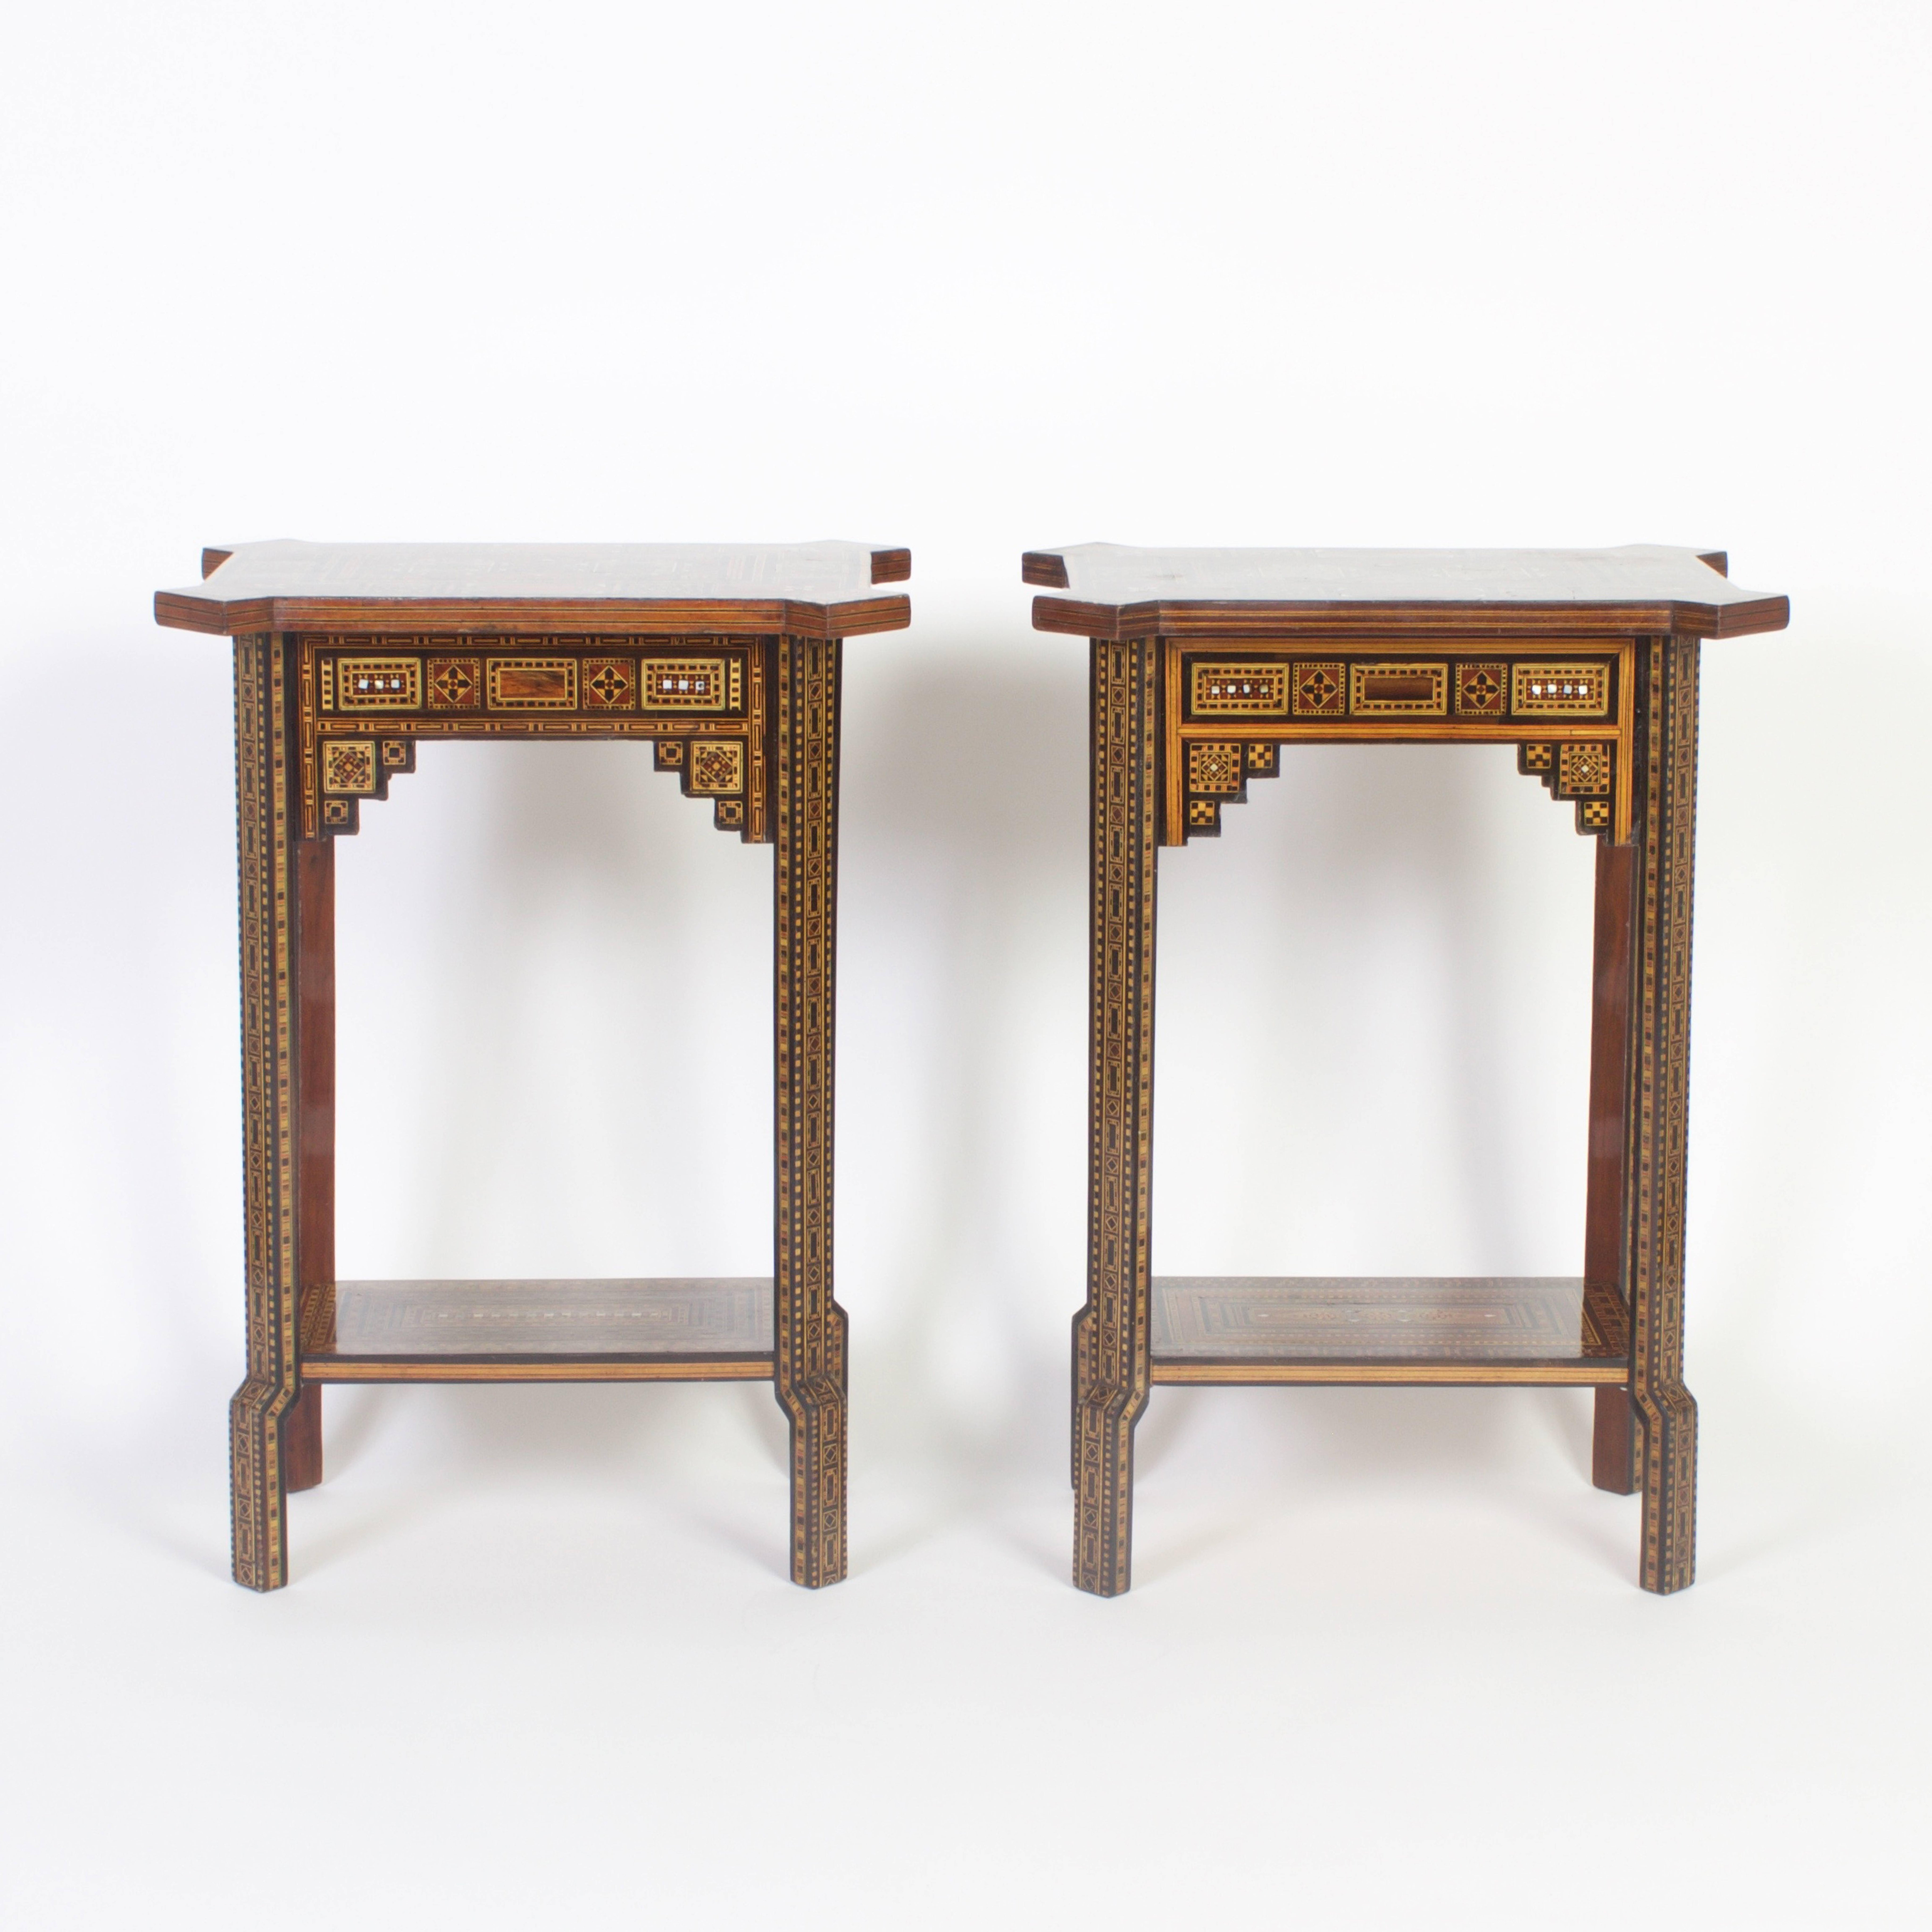 Here is an impressive pair of Syrian tables that function as nightstands or end tables. Covered in symbolic geometric marquetry on the tops, sides, legs and stretchers. Featuring highlights of mother-of-pearl and exotic wood inlays that make these